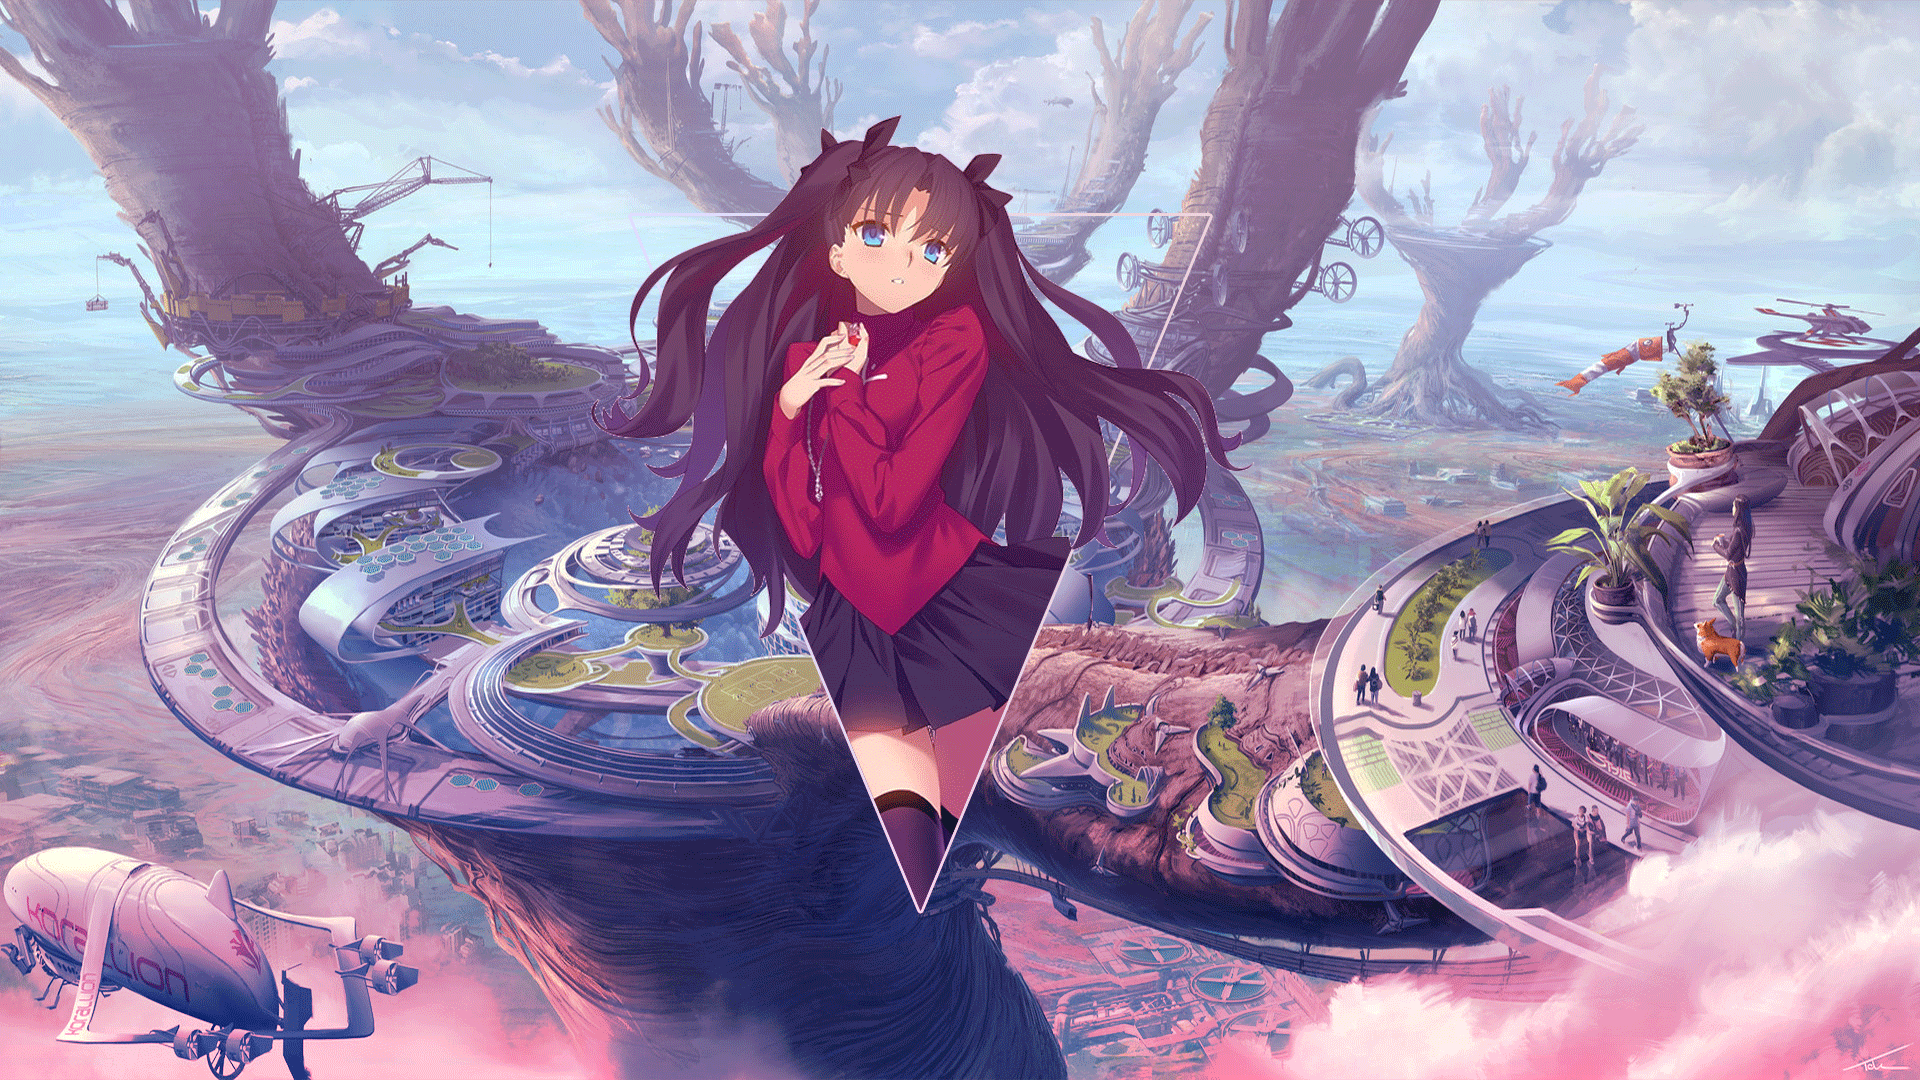 Anime Anime Girls Anime Landscape Tohsaka Rin Fate Stay Night City Digital Art Photoshop Picture In  1920x1080